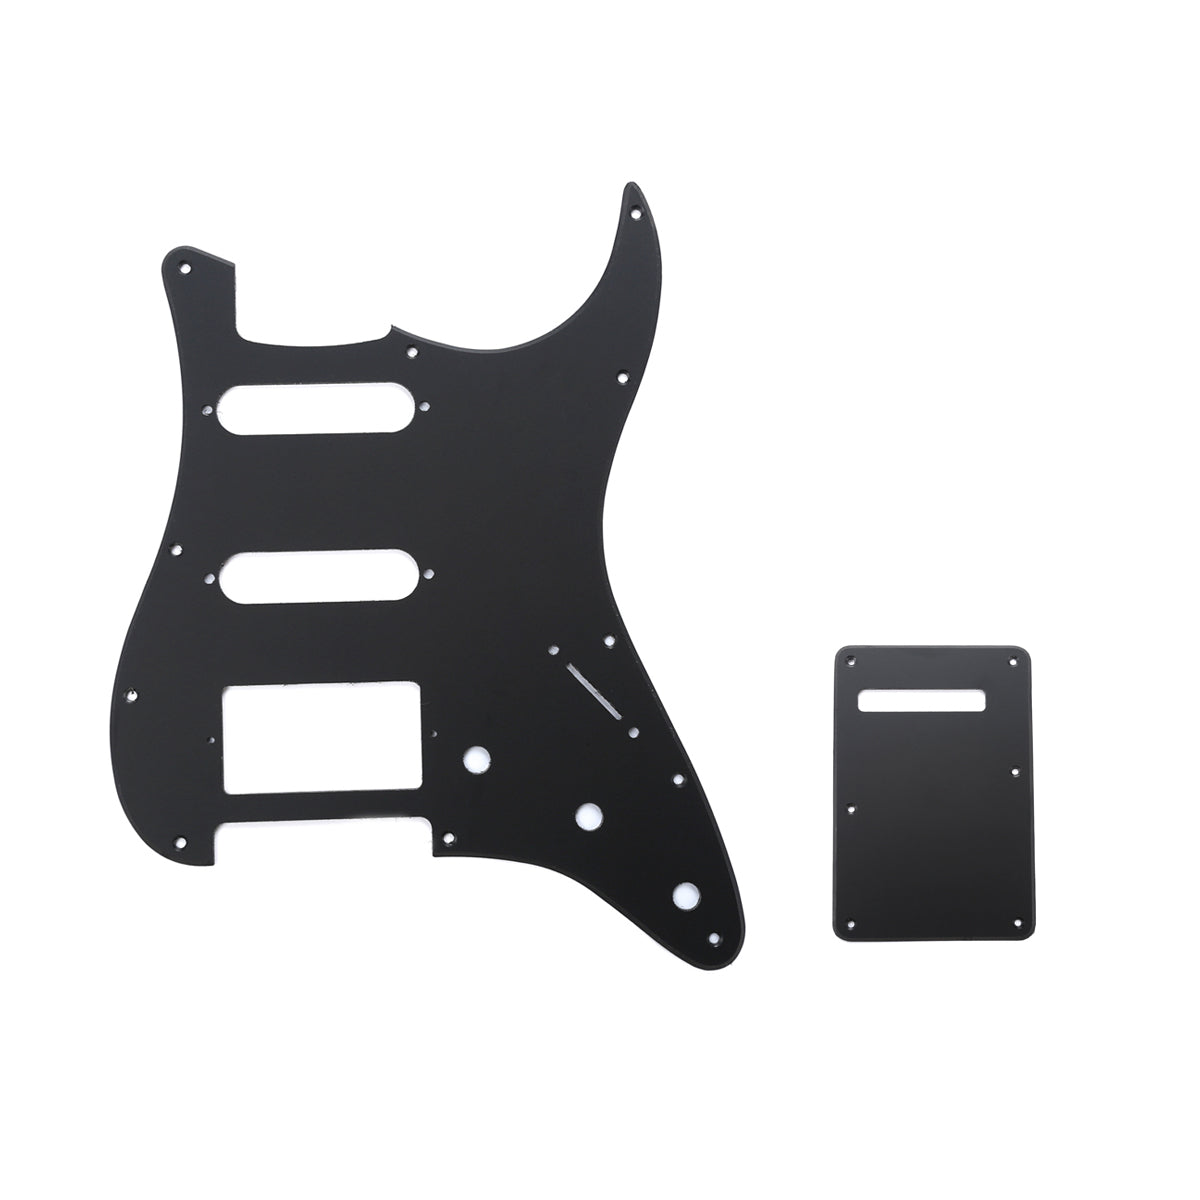 Musiclily SSH 11 Hole Strat Guitar Pickguard and BackPlate Set for Fender USA/Mexican Standard Stratocaster Modern Style, 1Ply Matte Black